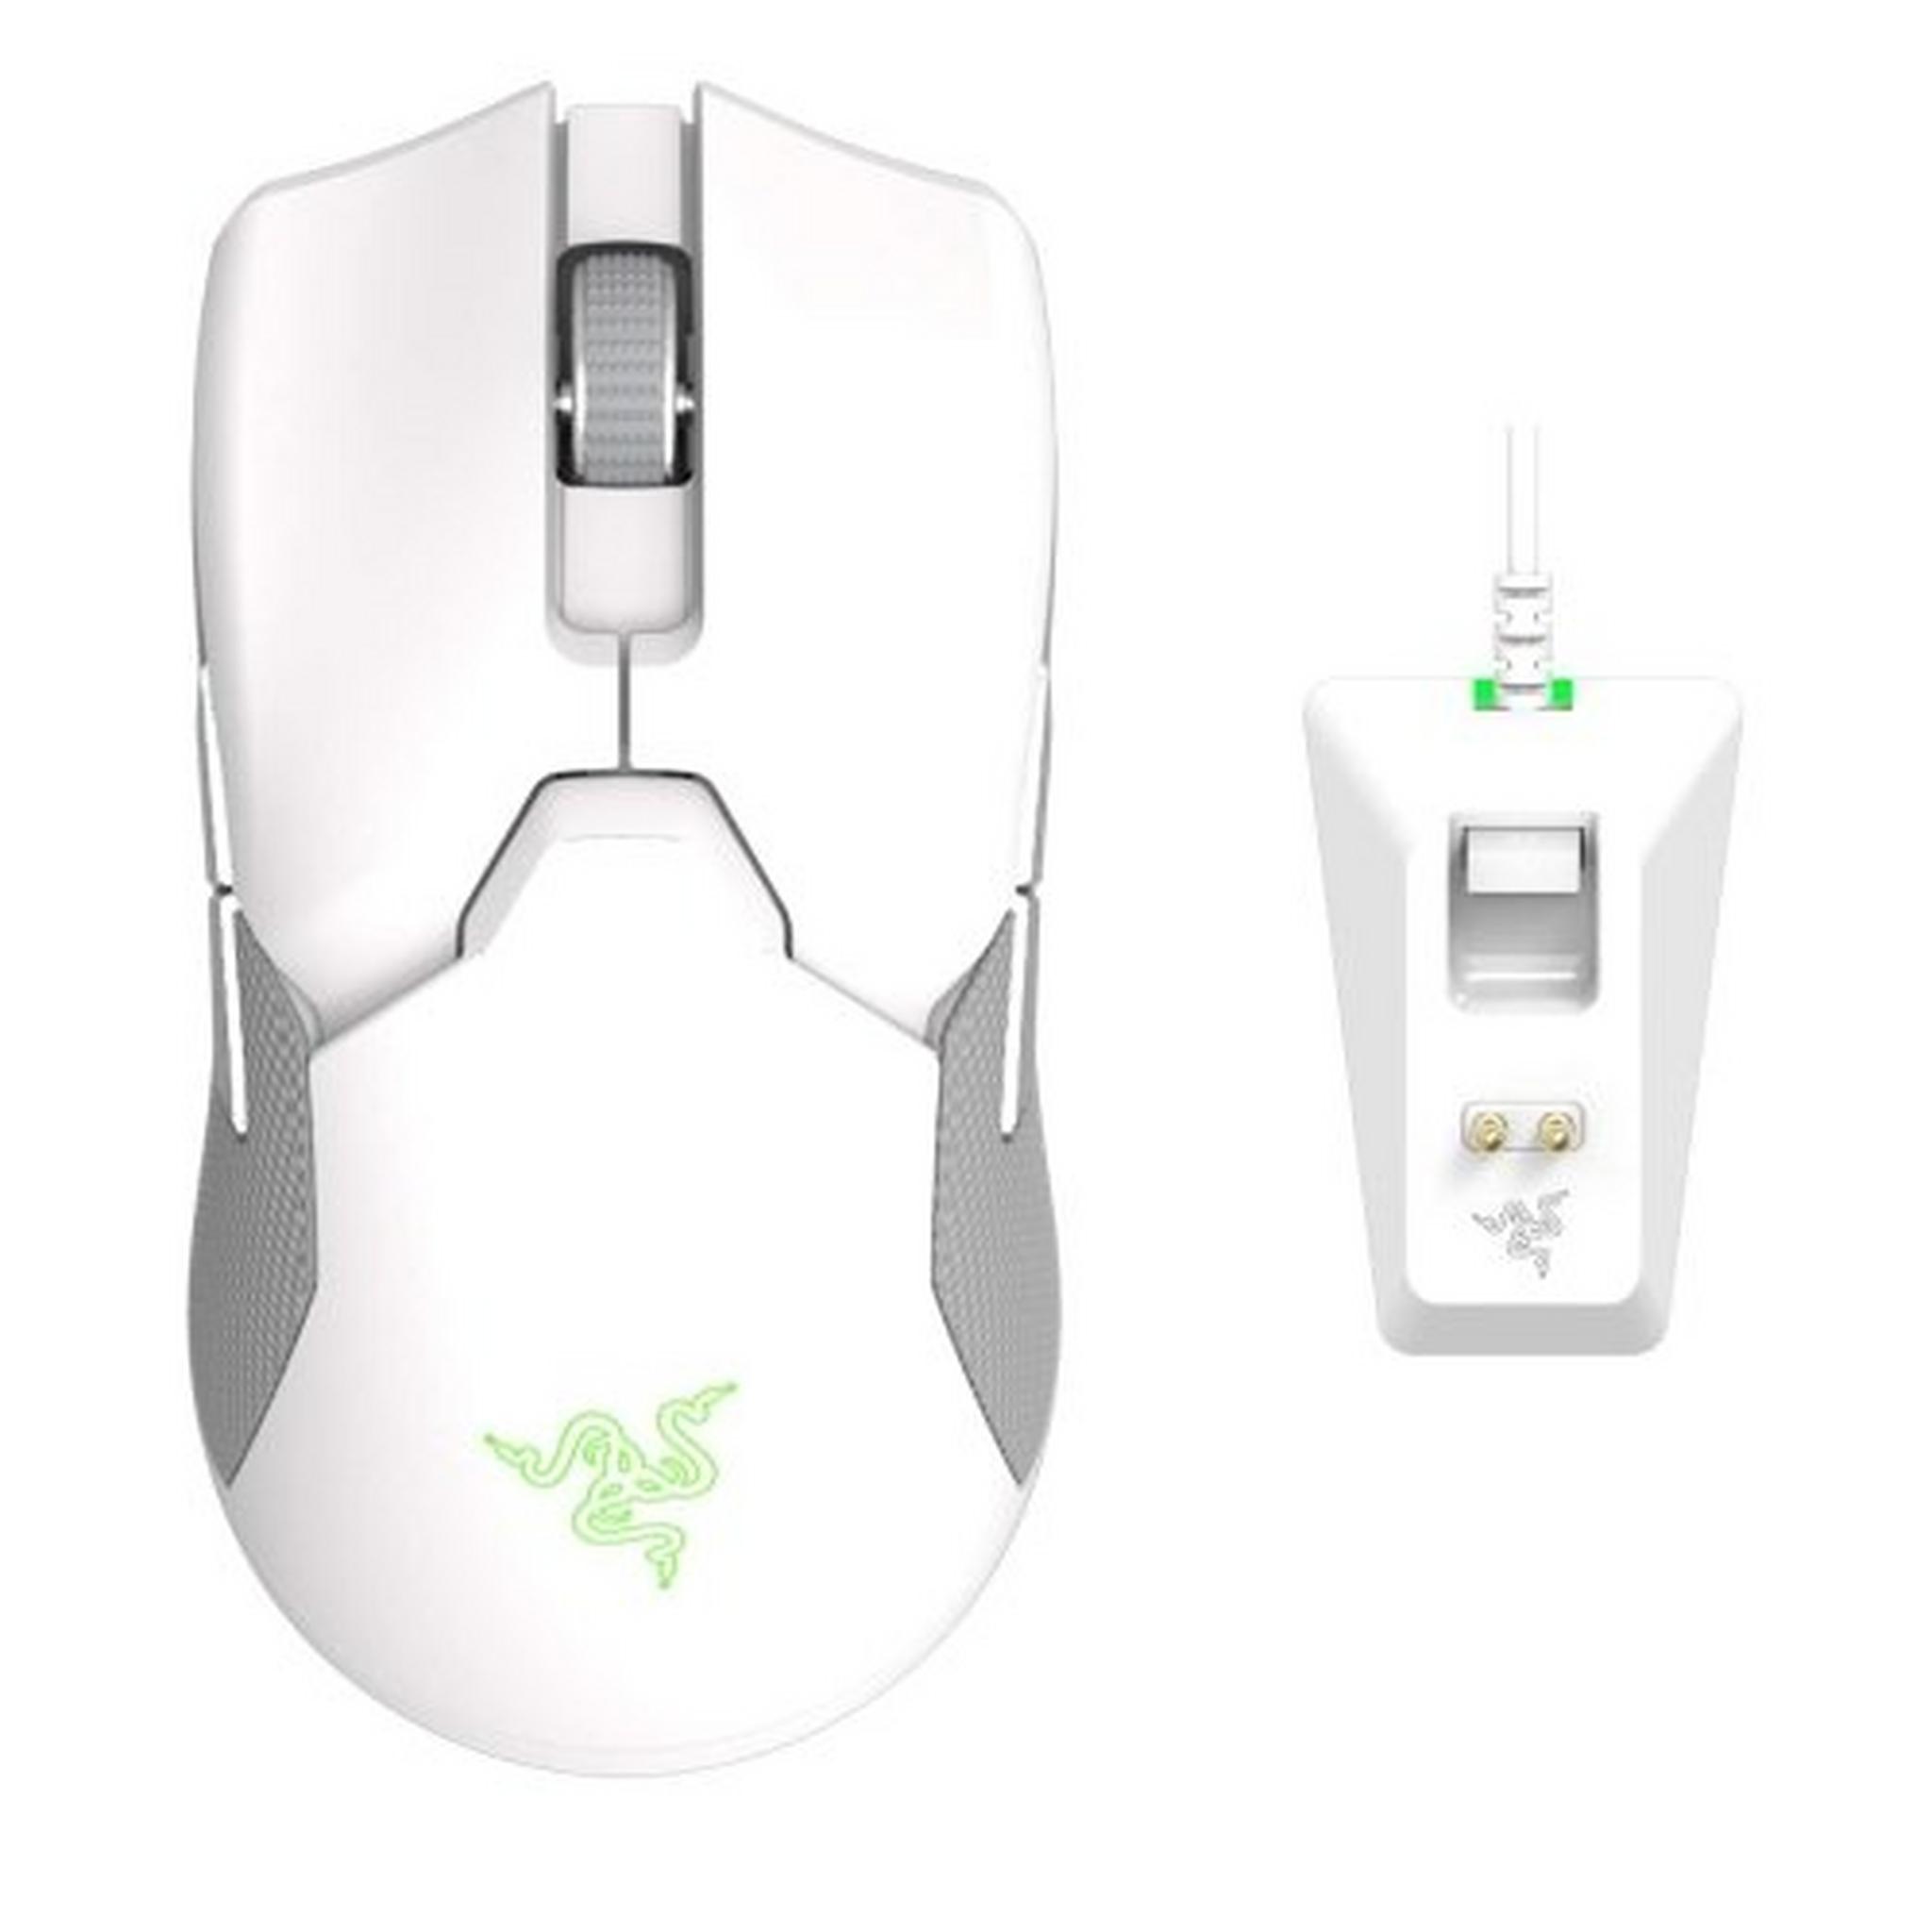 Razer Viper Ultimate Wireless Mouse with Charging Dock - Mercury